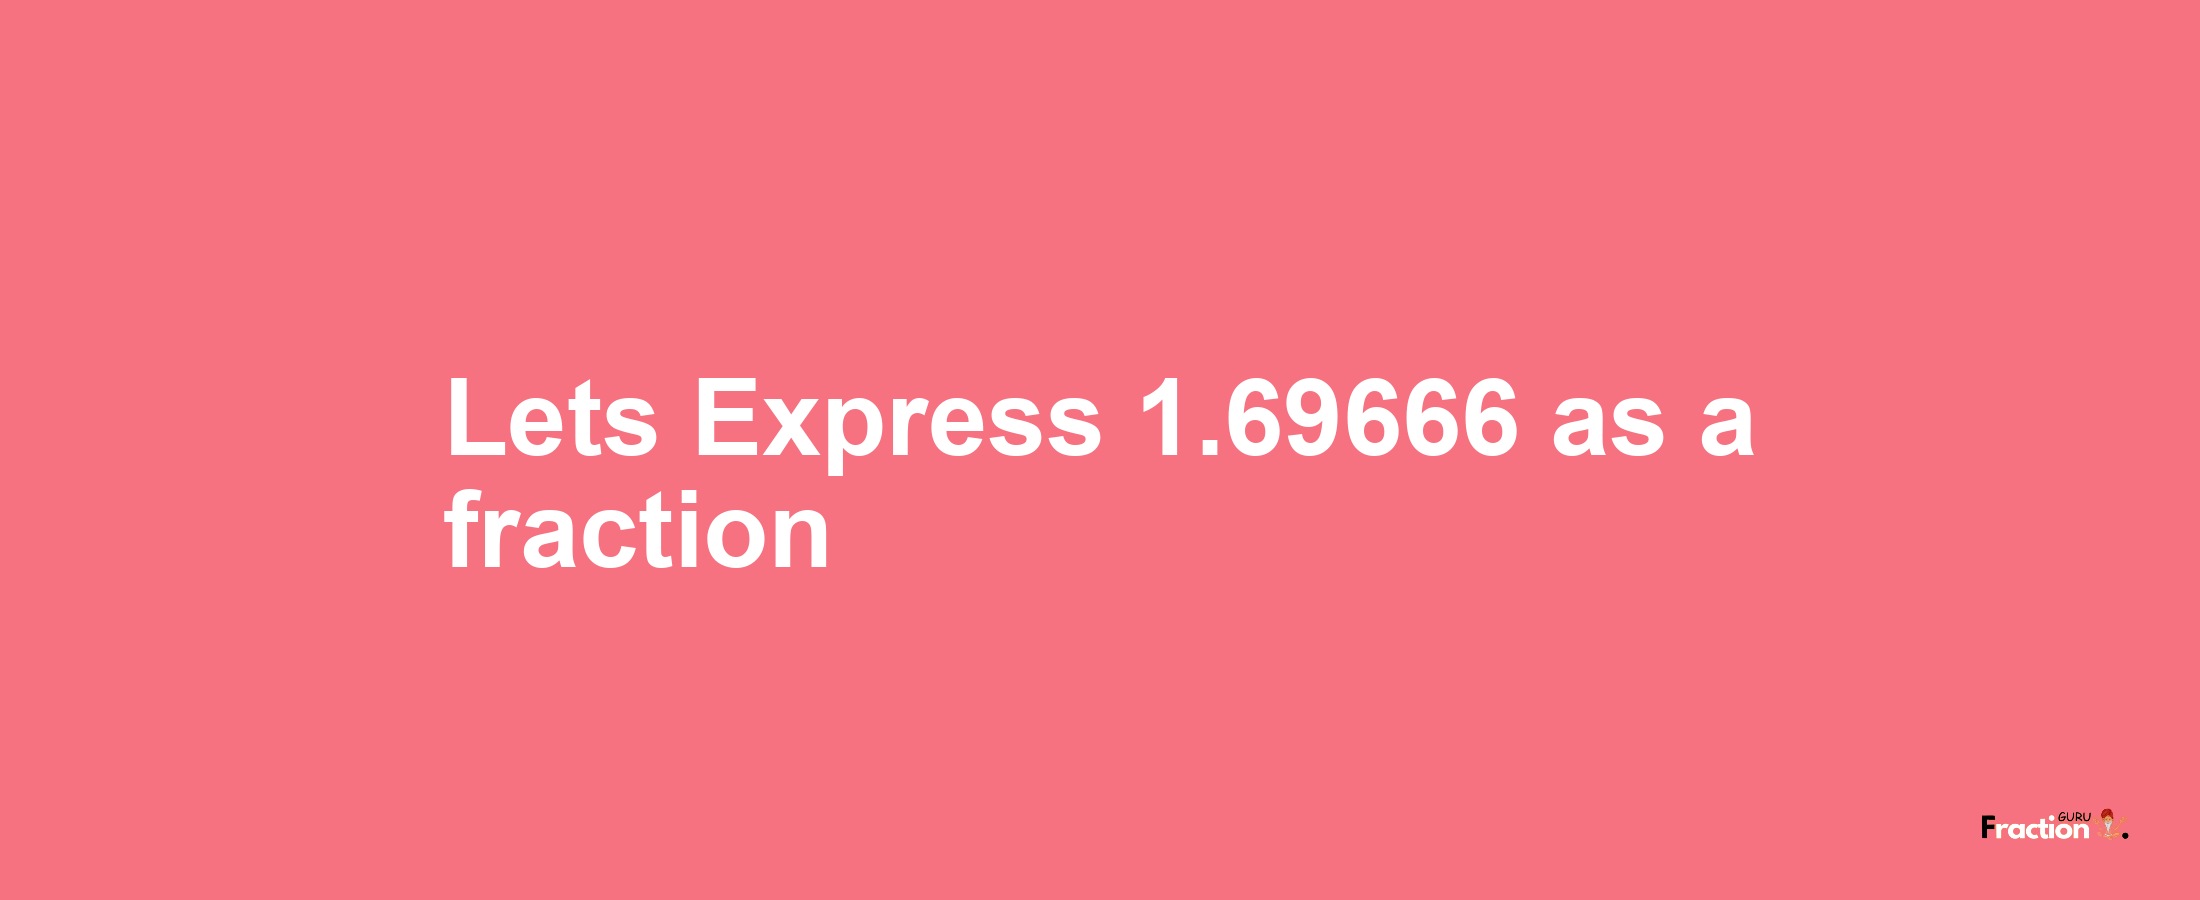 Lets Express 1.69666 as afraction